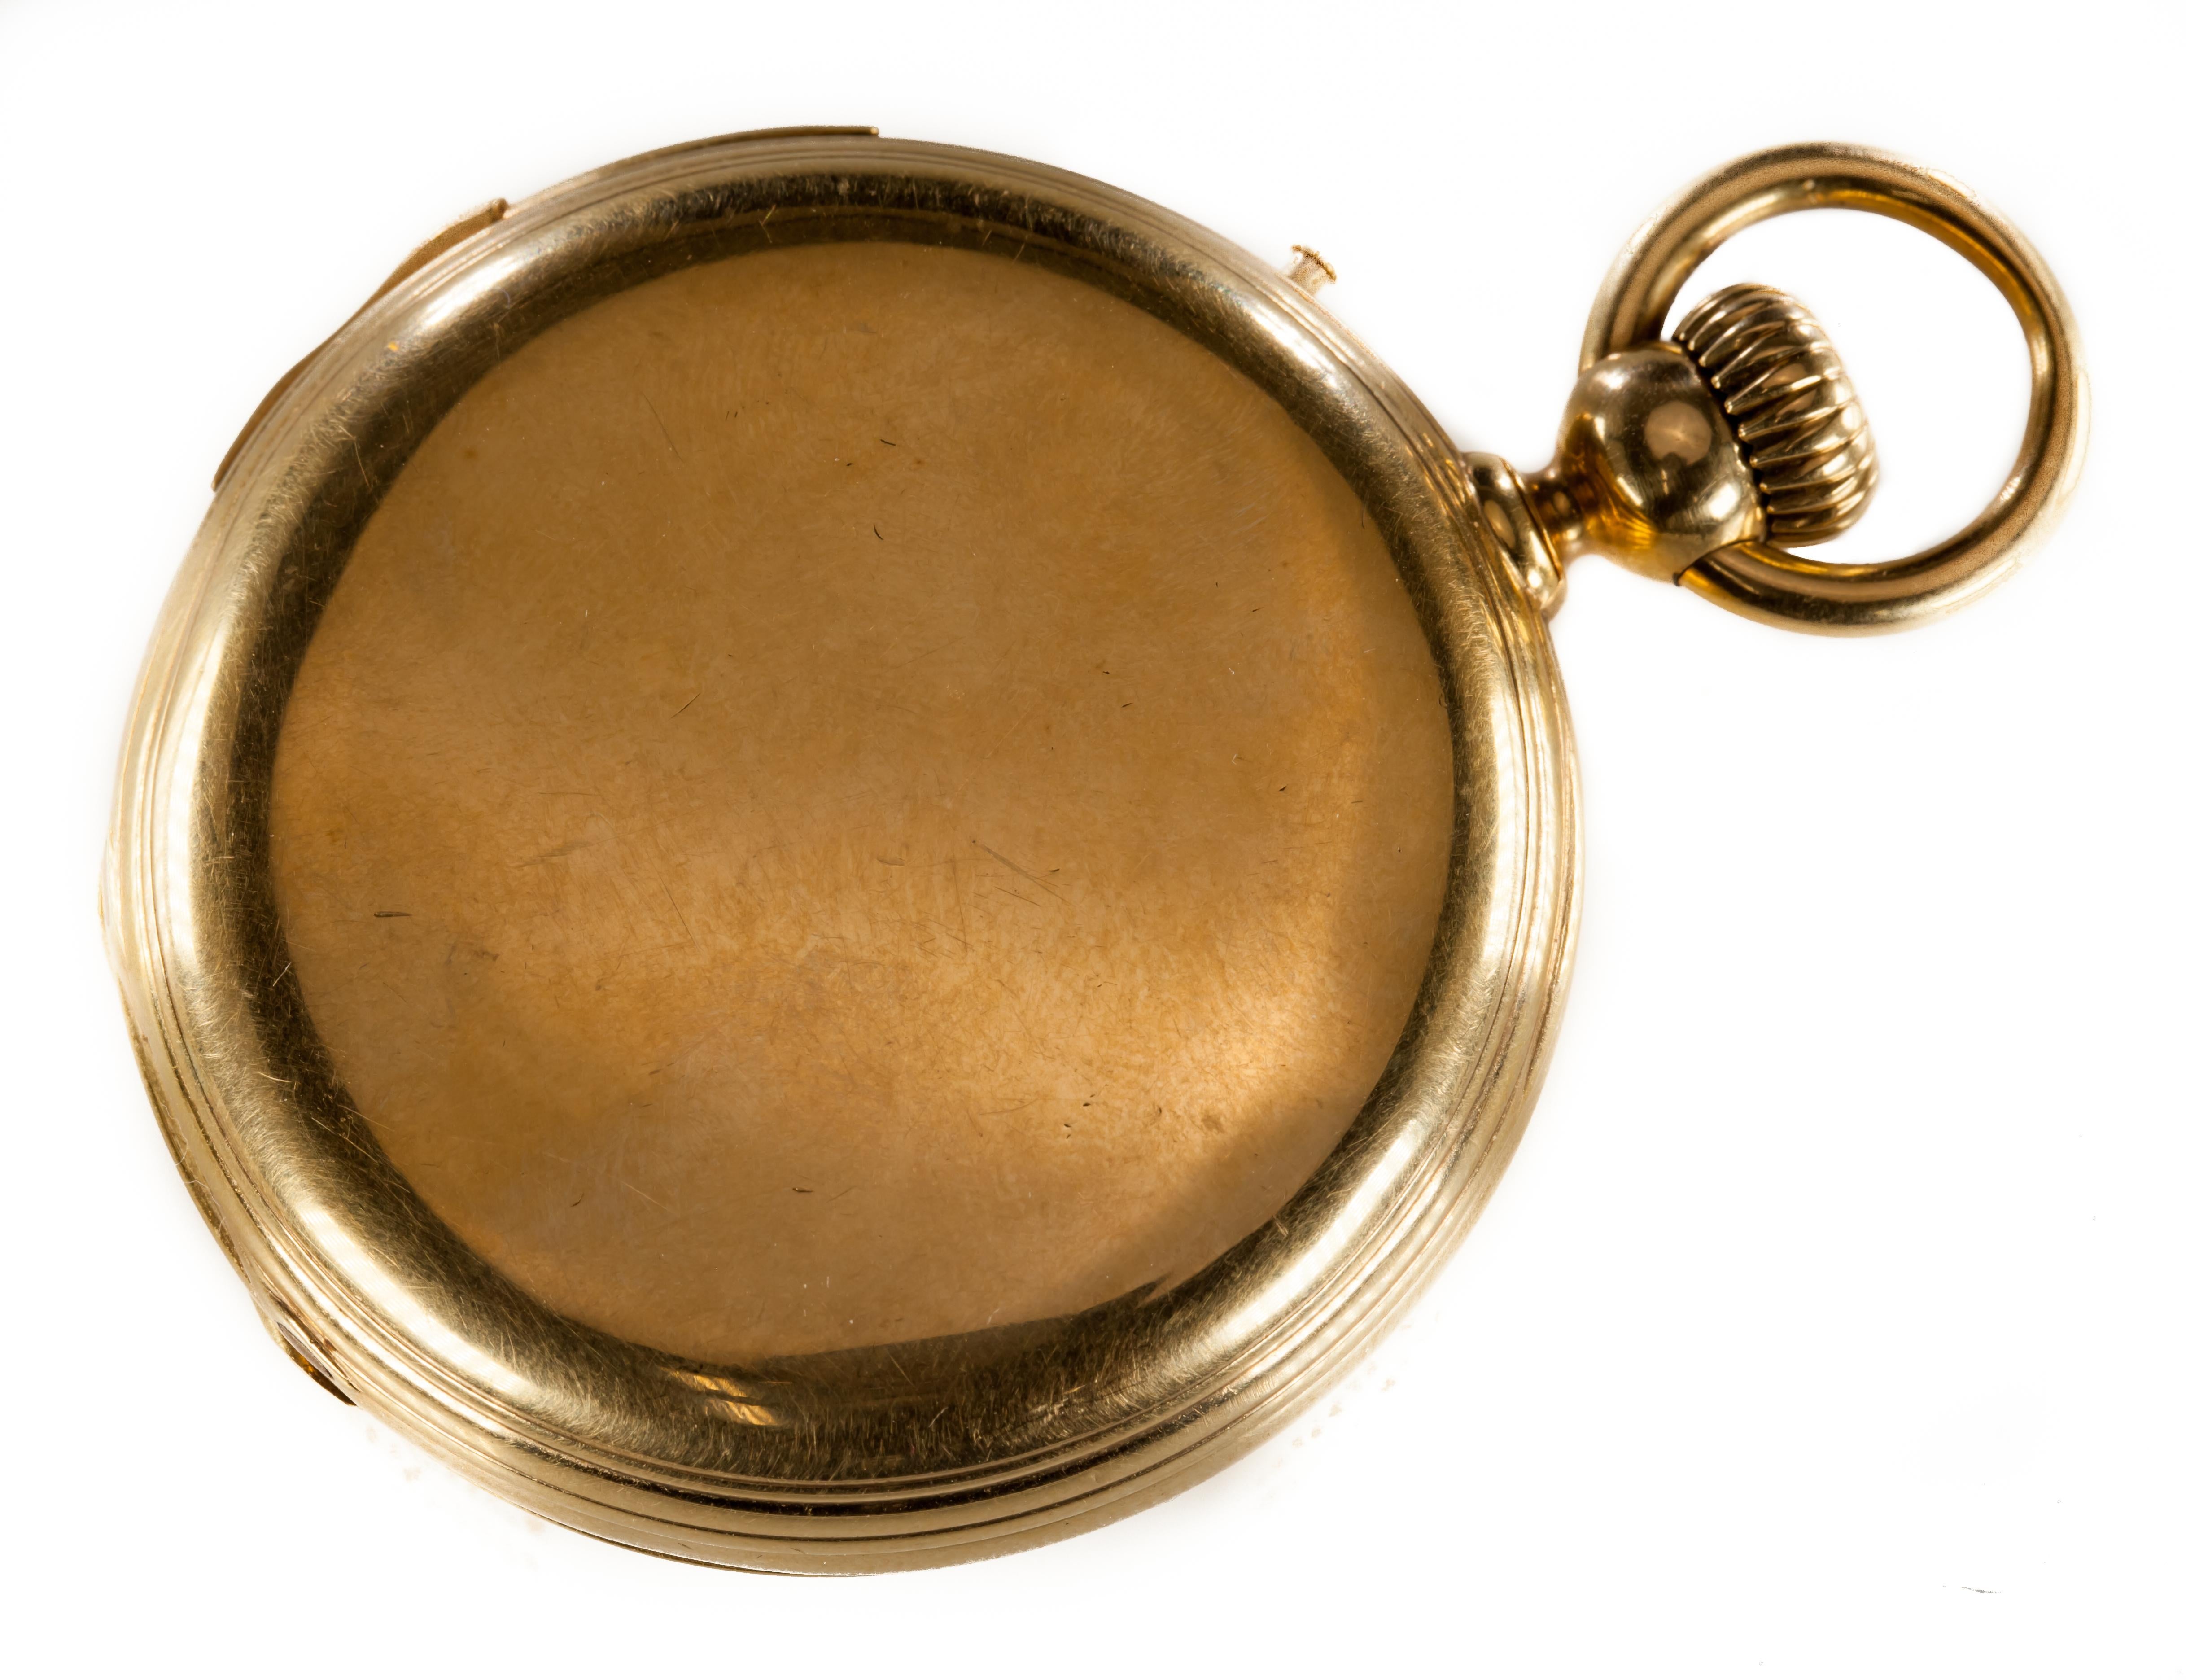 Gorgeous Vintage Double Hunter Pocket Watch by C.H. Meylan & Fleischmann
Features Minute Repeater, 35 Rubis 
Dedicated Second Dial
18k Yellow Gold Case w/ Inner Glass for Movement
Movement is 49.5 mm in Diameter 
Total Mass = 112.7 grams
Amazing